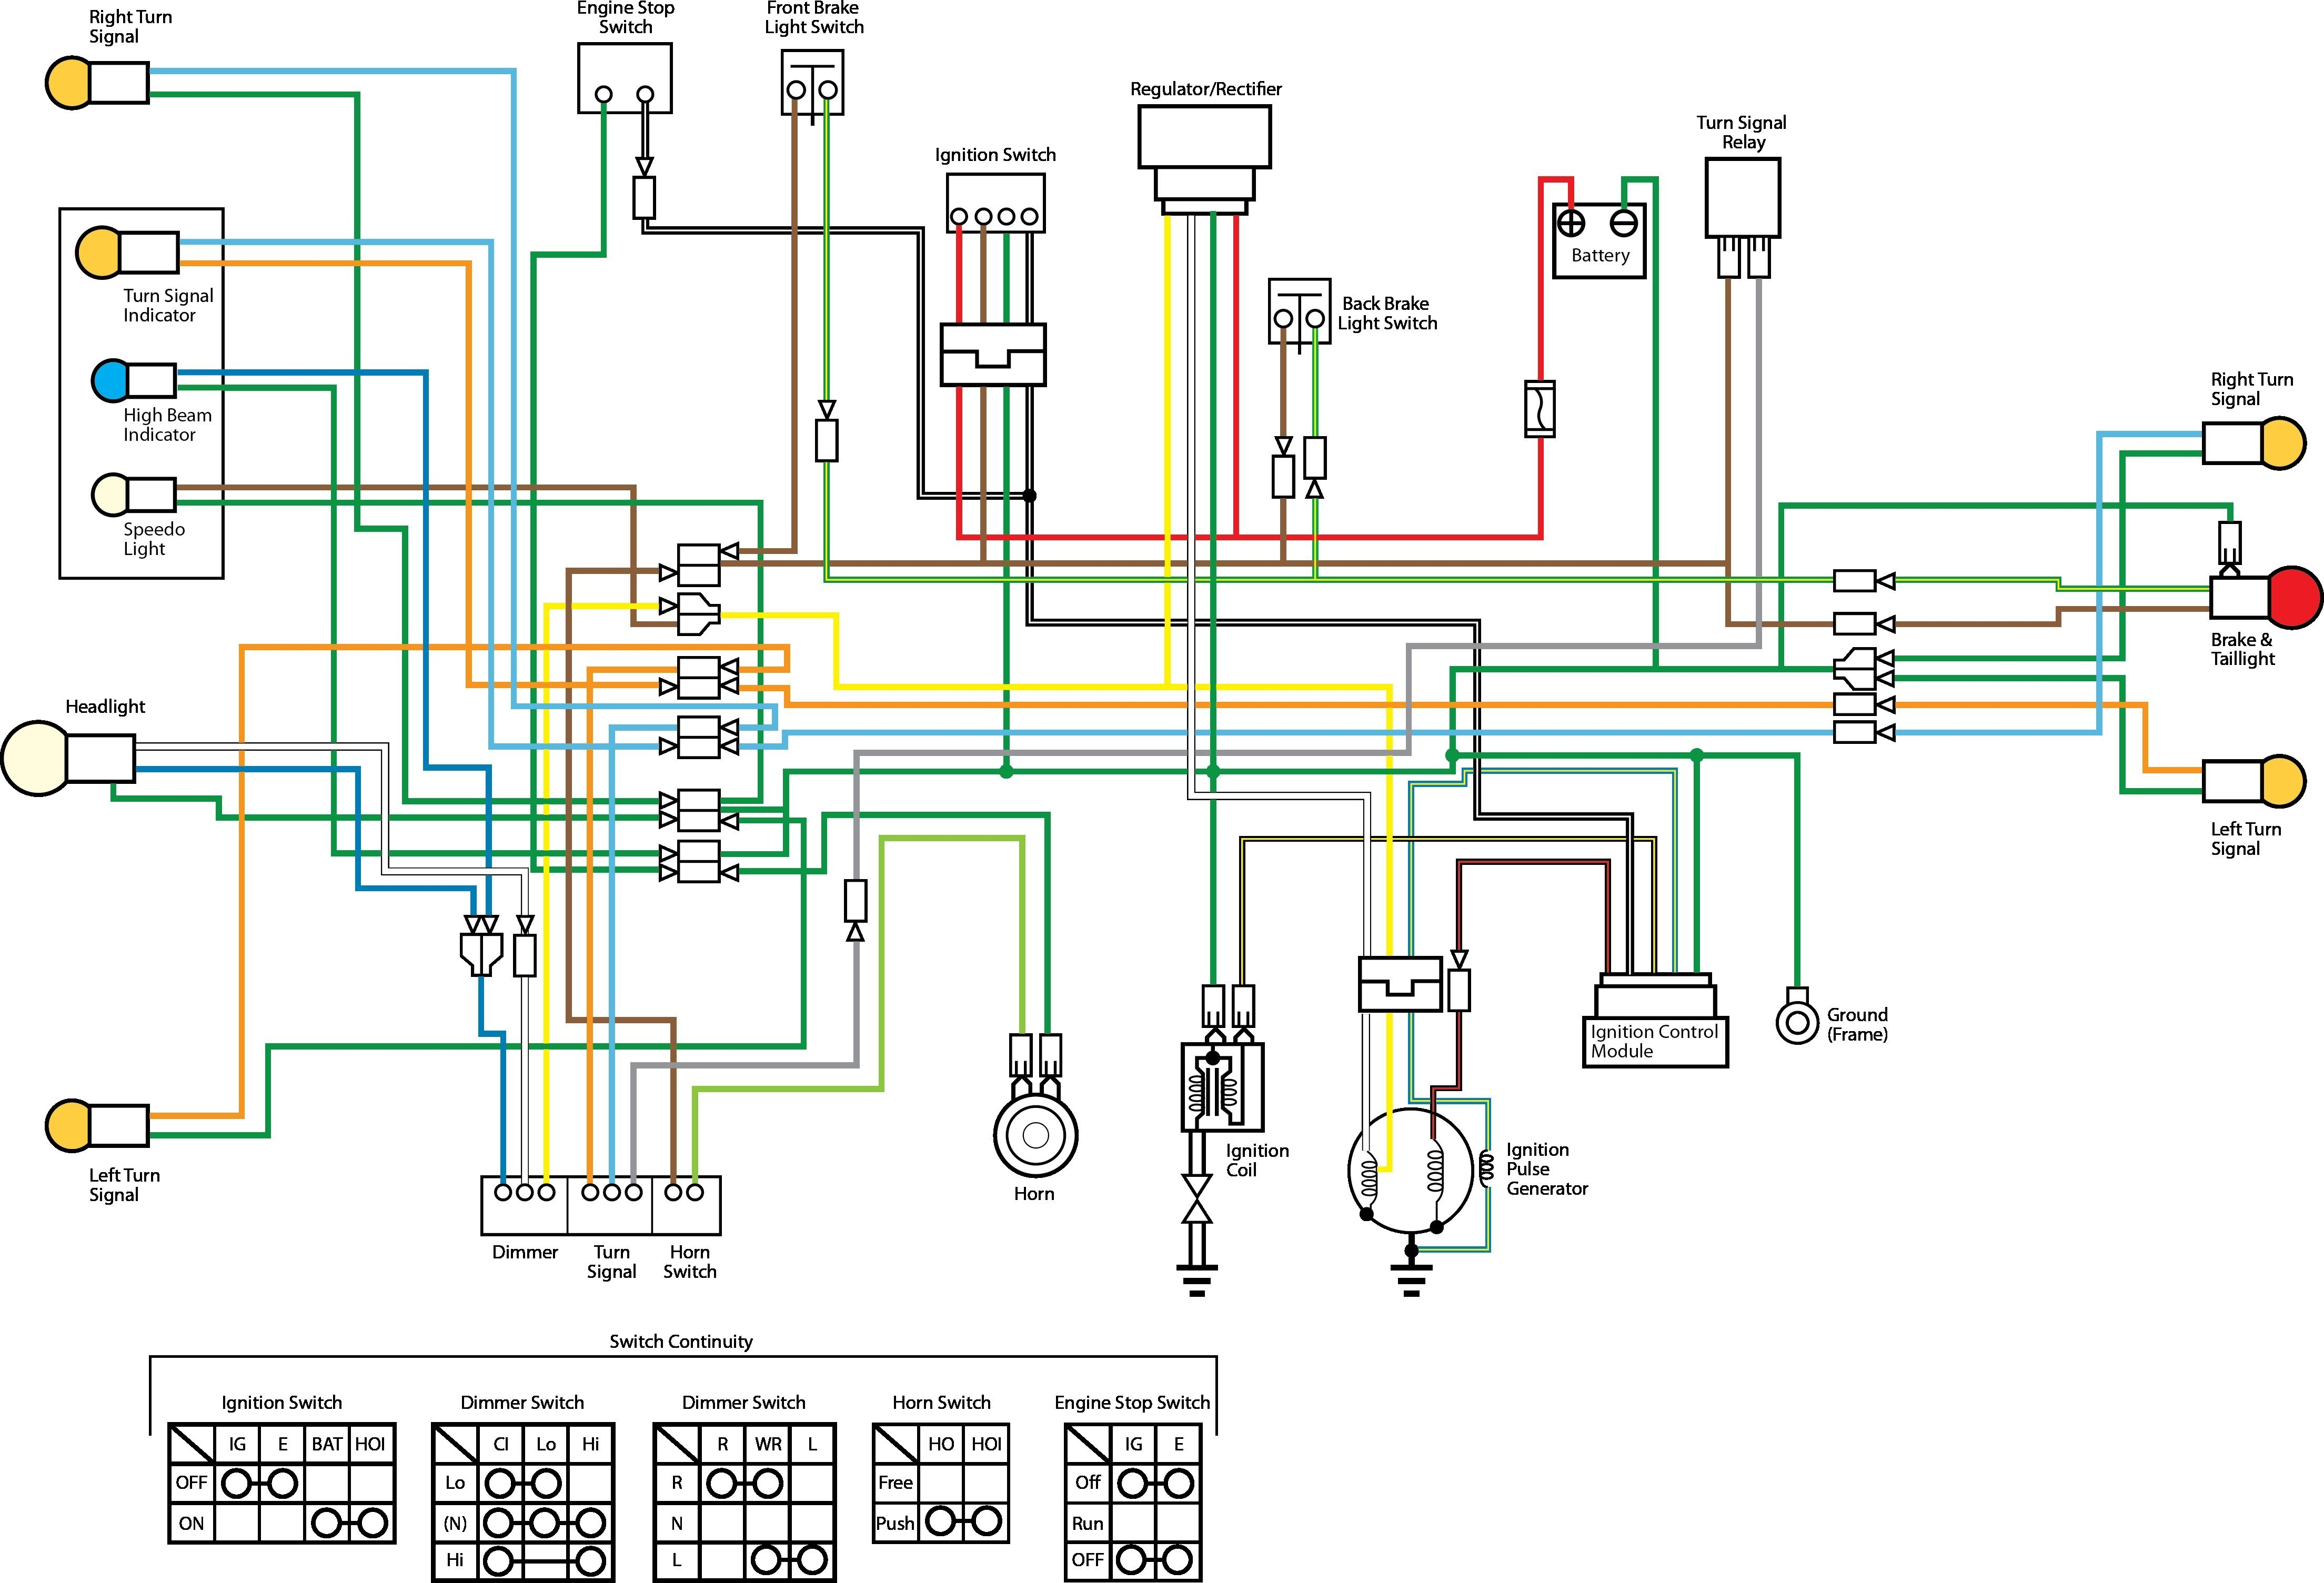 Wiring Diagram Maker Wiring Diagram For 65 Plymouth 6 Search Wiring Diagrams